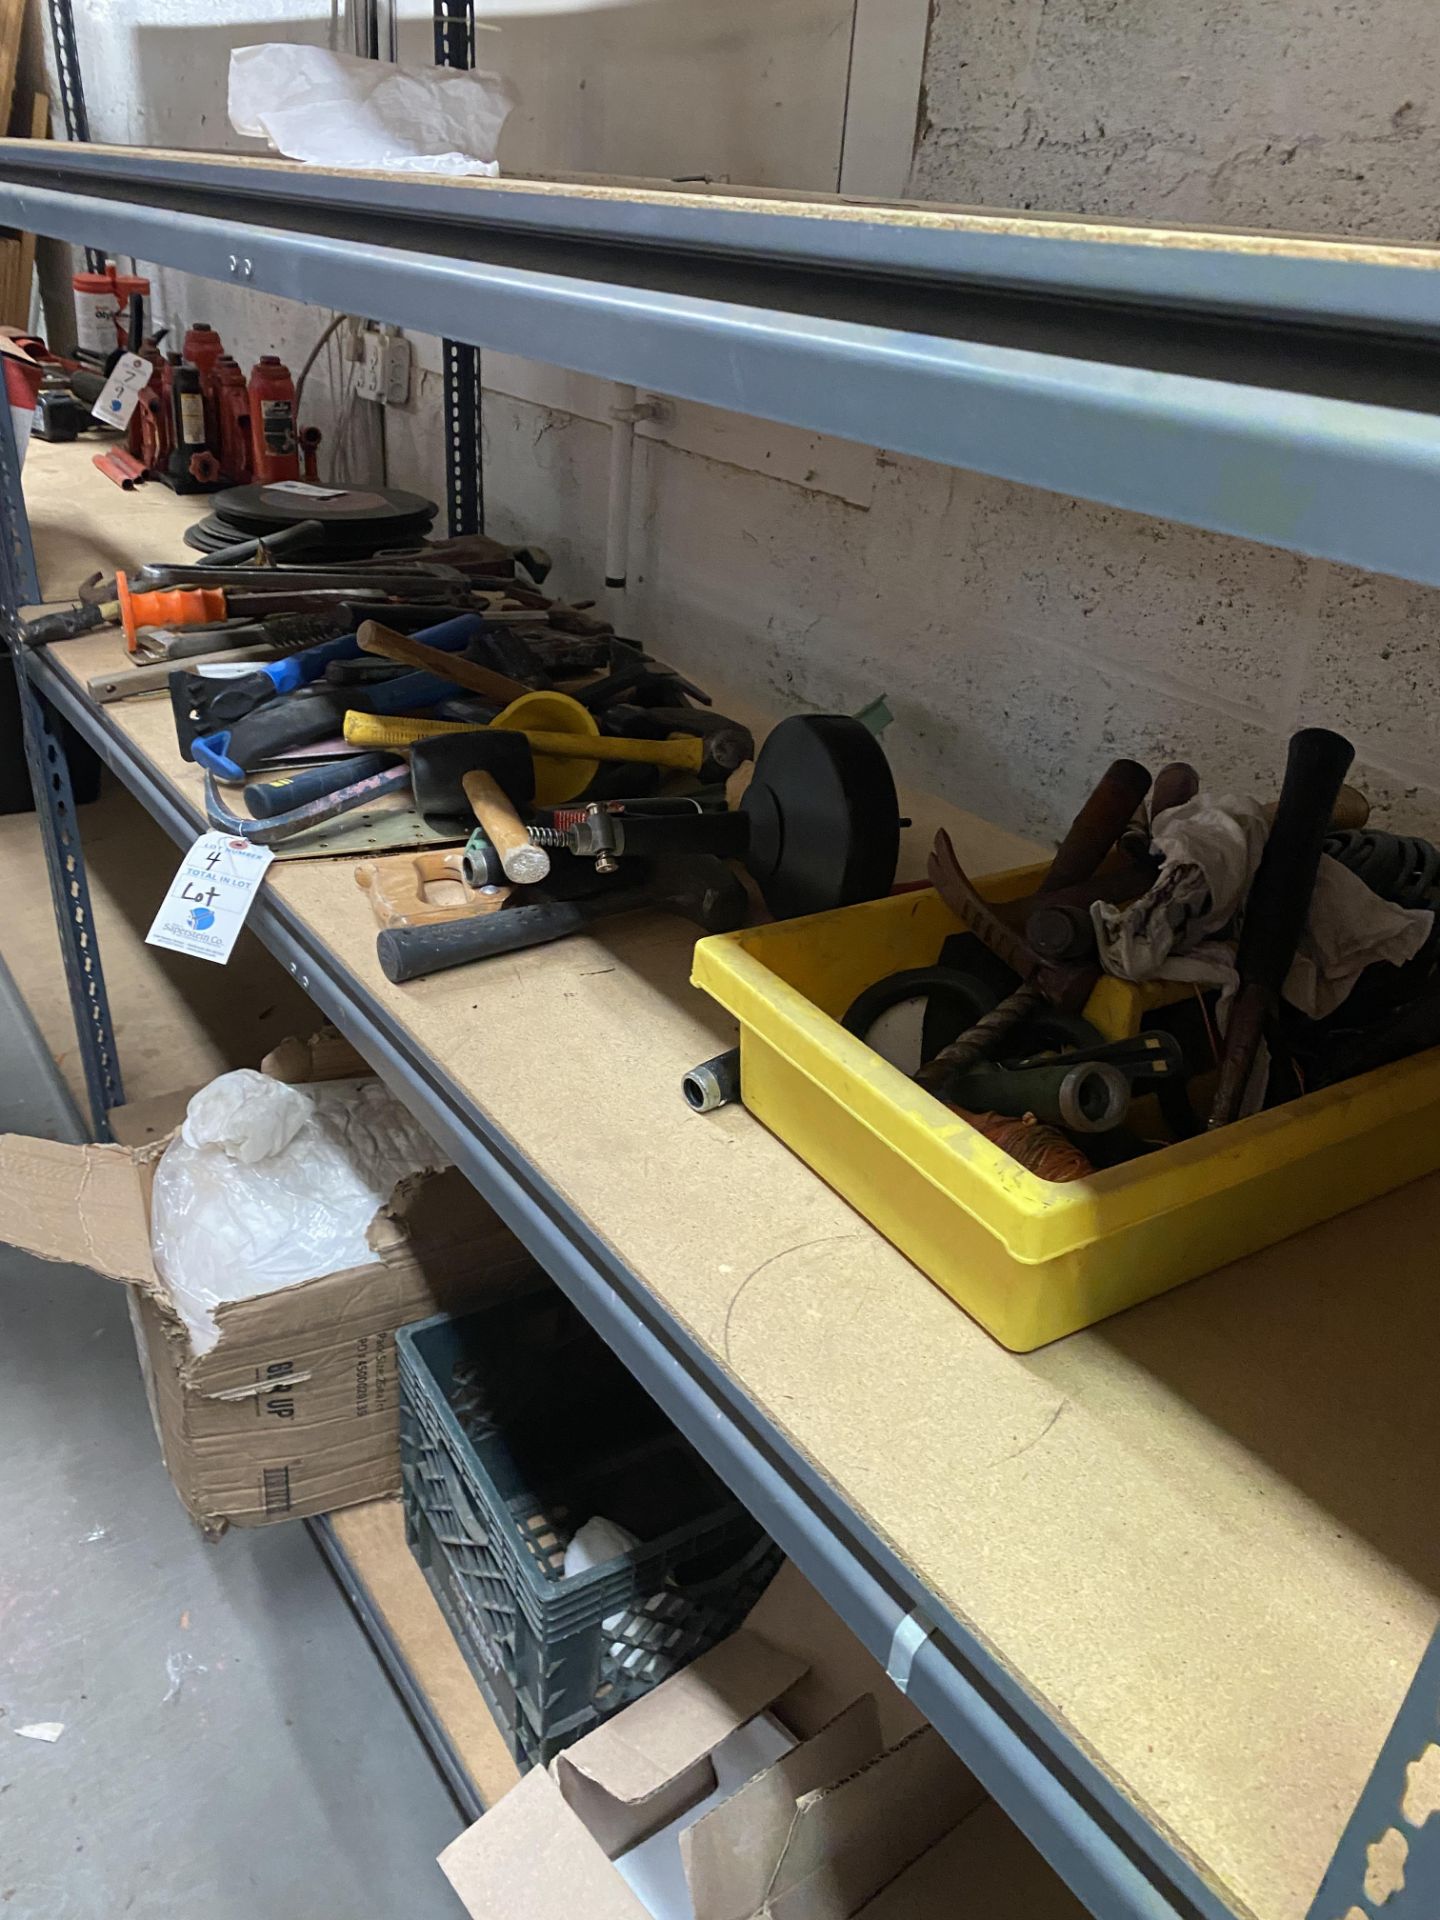 (Lot) Hand Tools C/o: Hammers Wrenches, Saws on 1 Shelf - Image 2 of 4